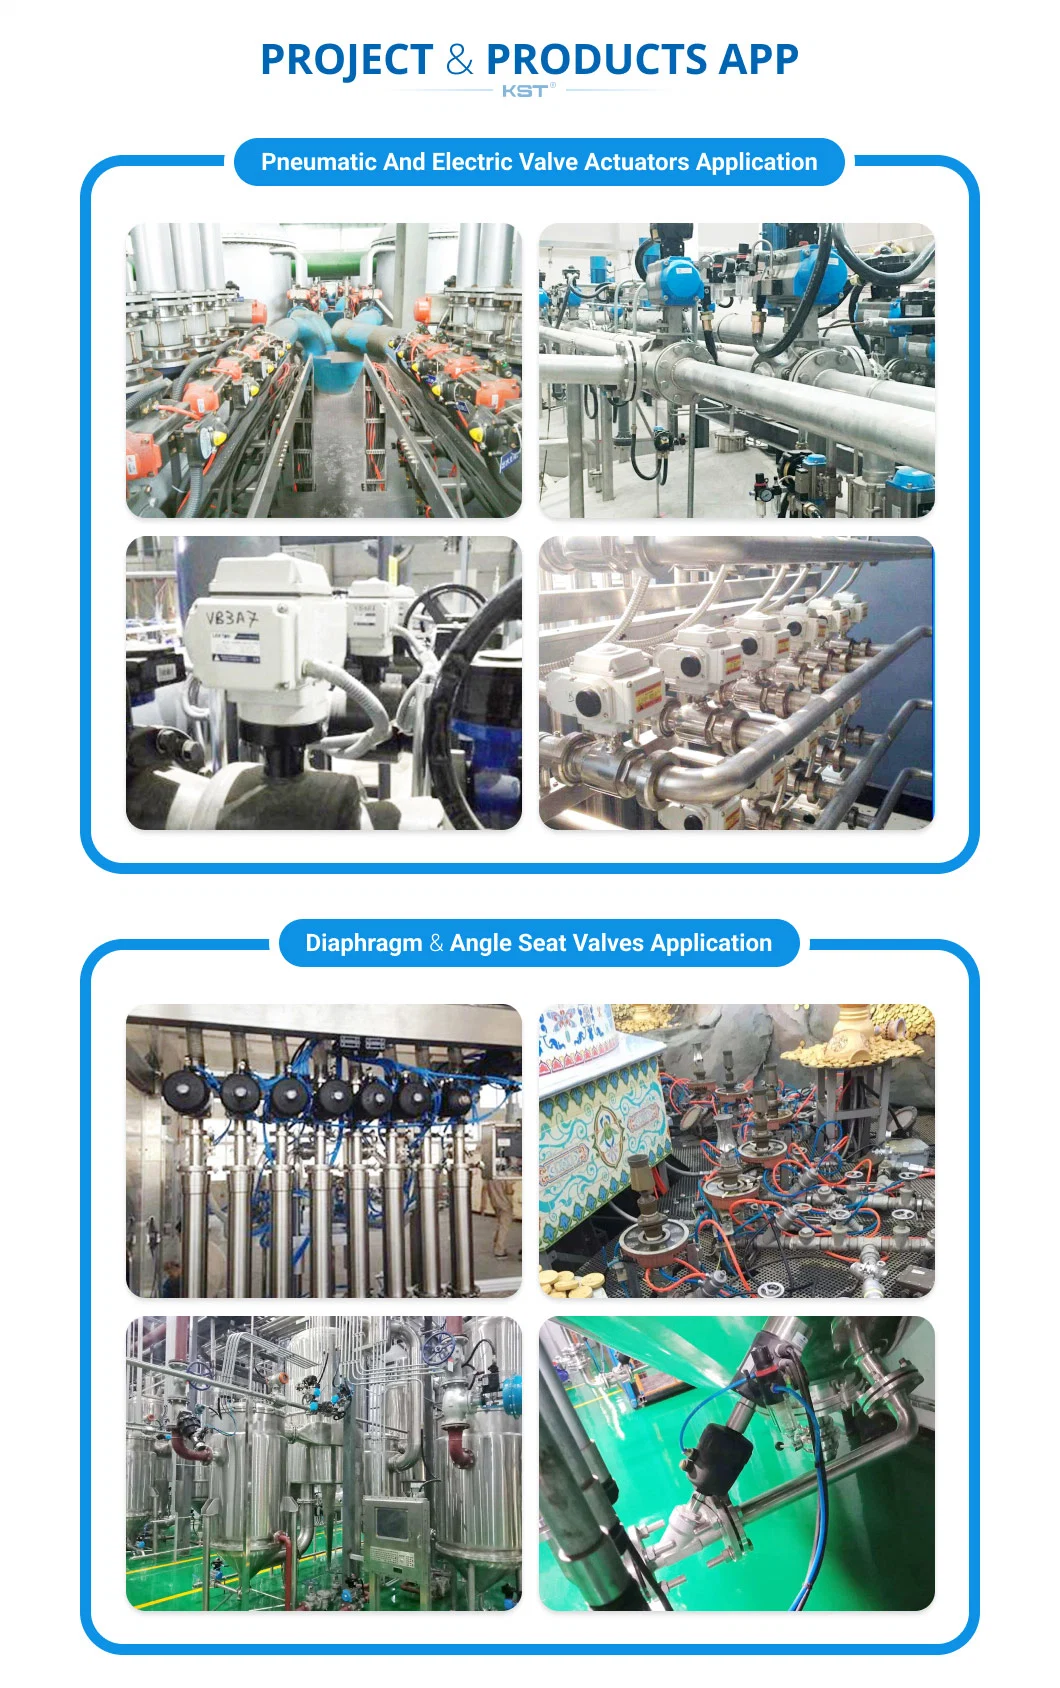 Double Action / Single Action Rack and Pinion/Double Acting/Single Acting PTFE Coated/Aluminum Alloy Casting with Ball/Butterfly Valve at Pneumatic Actuator